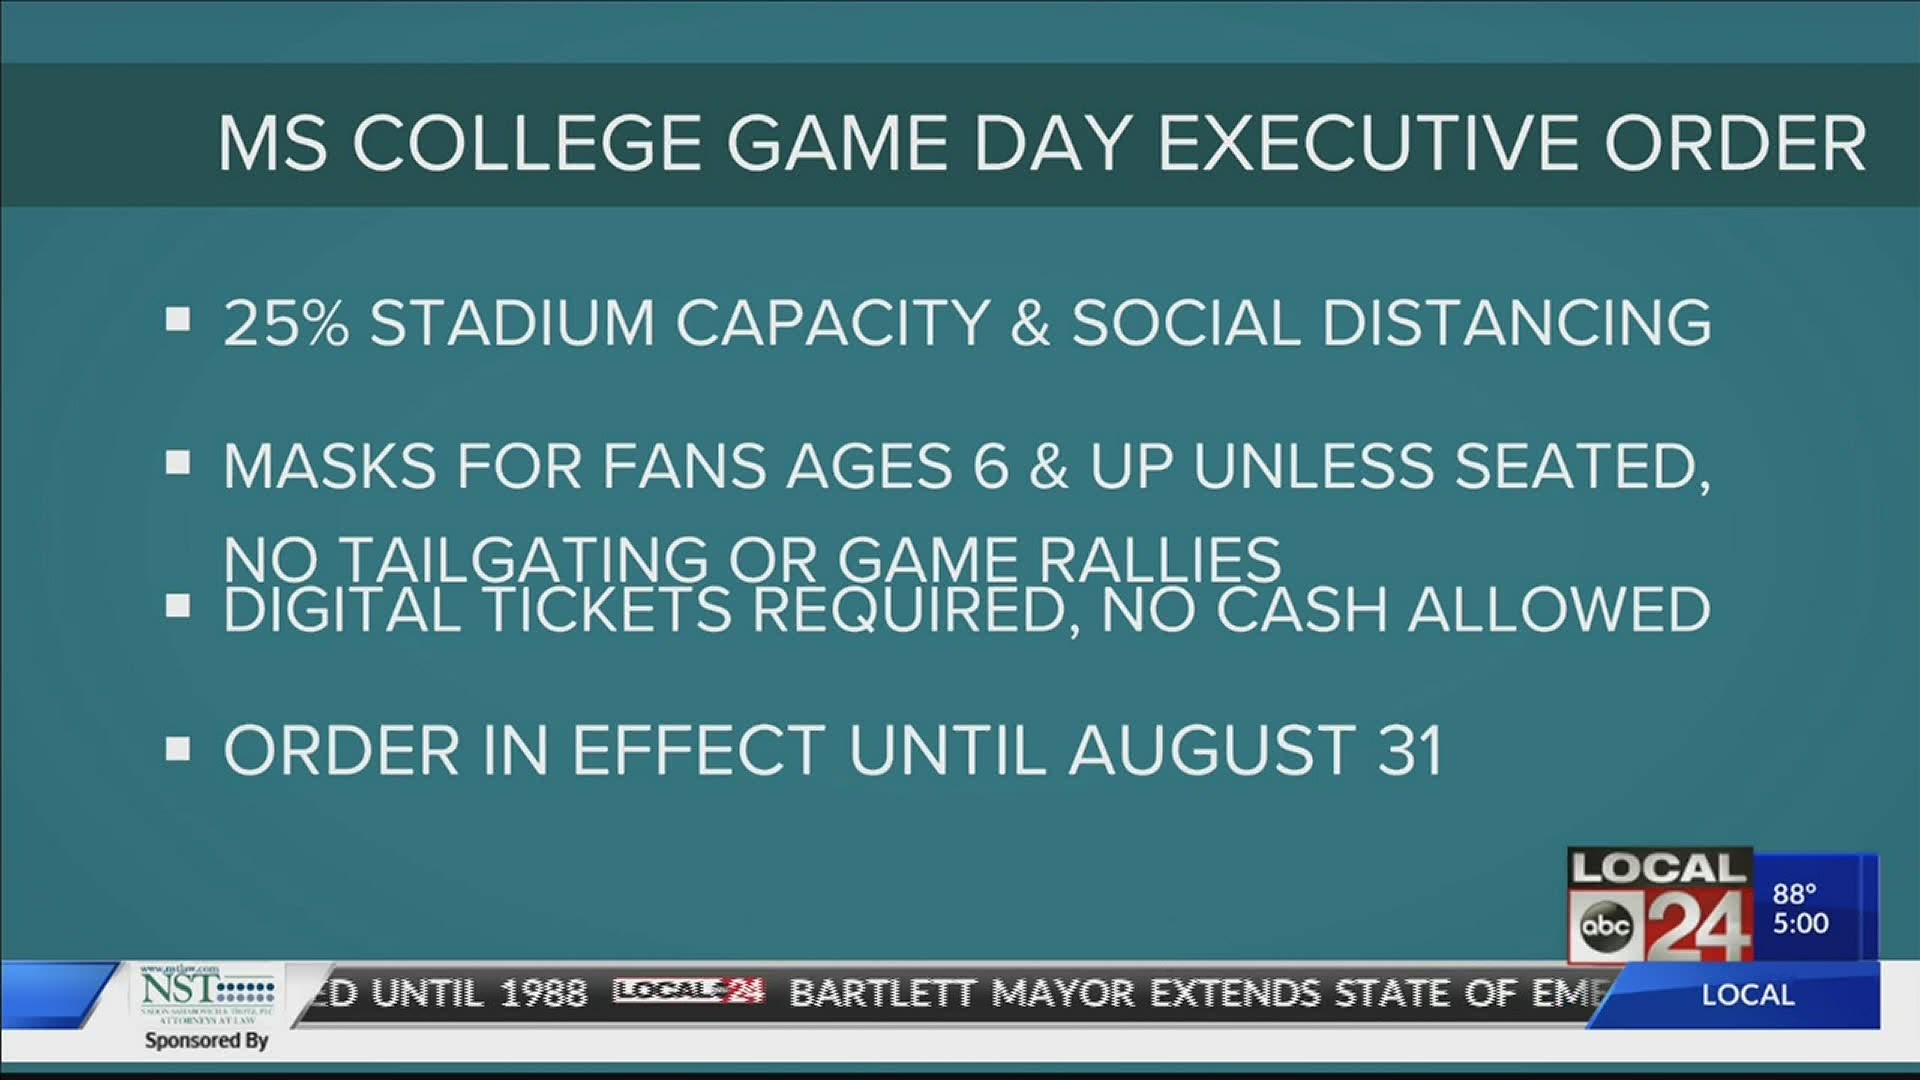 The order affects upcoming games at colleges and universities in the state.